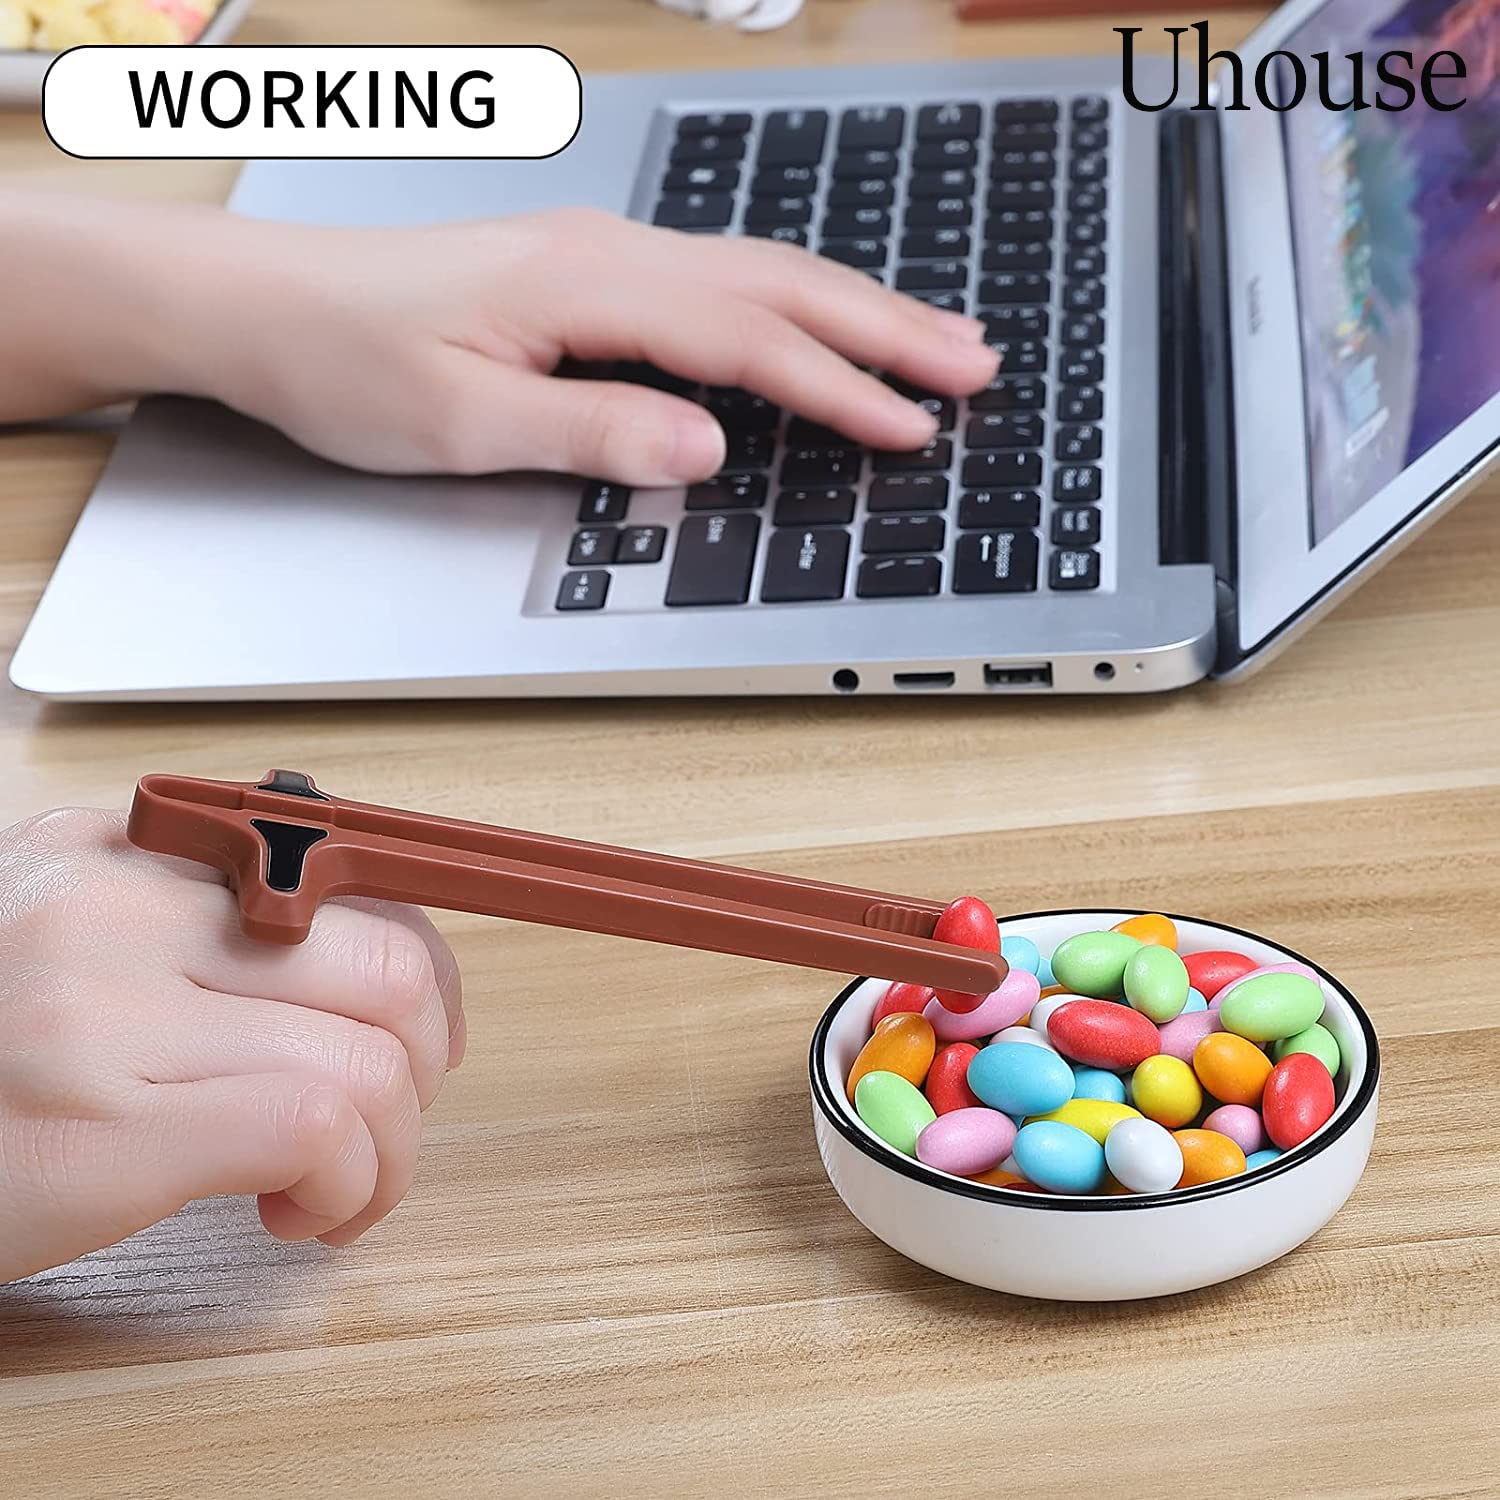 UHOUSE 4pcs Finger Chopsticks for Gamers,Snack Clips,Video Game Party Supplies,Kids Chopsticks,Creative Gamer Accessories,Gifts for Gamers